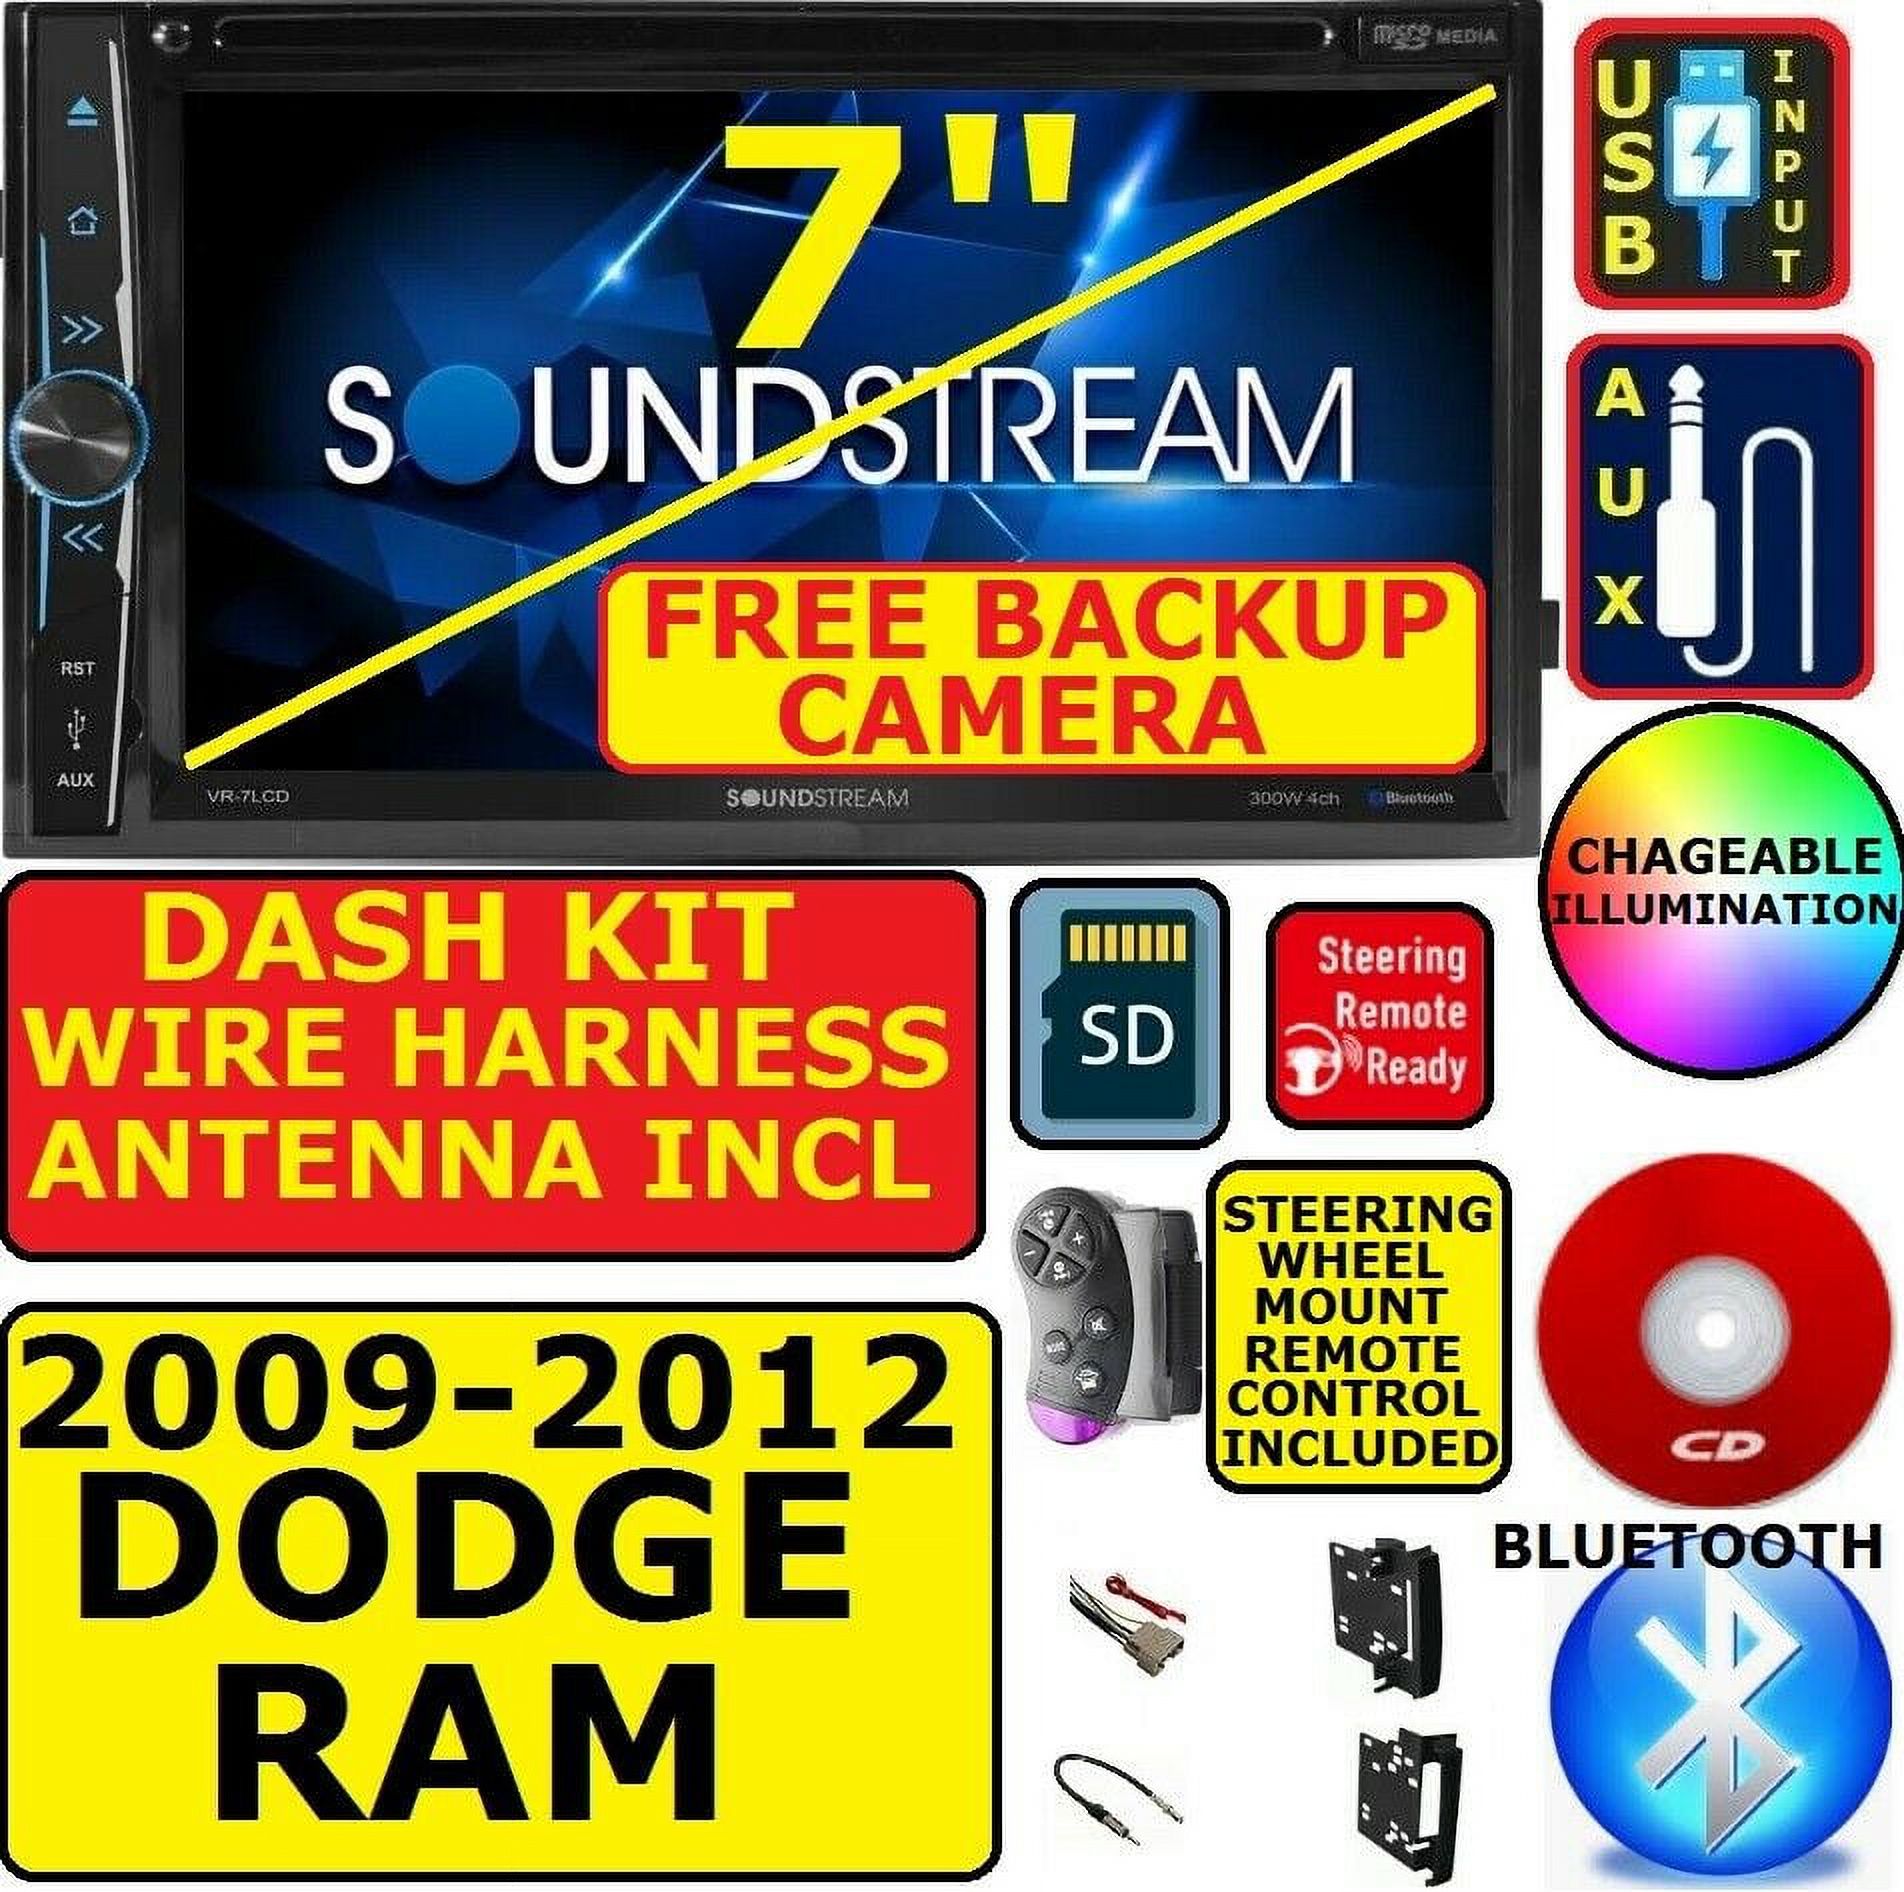 2009-2012 DODGE RAM TRUCK BLUETOOTH TOUCHSCREEN USB AUX Car Radio Stereo - image 1 of 7